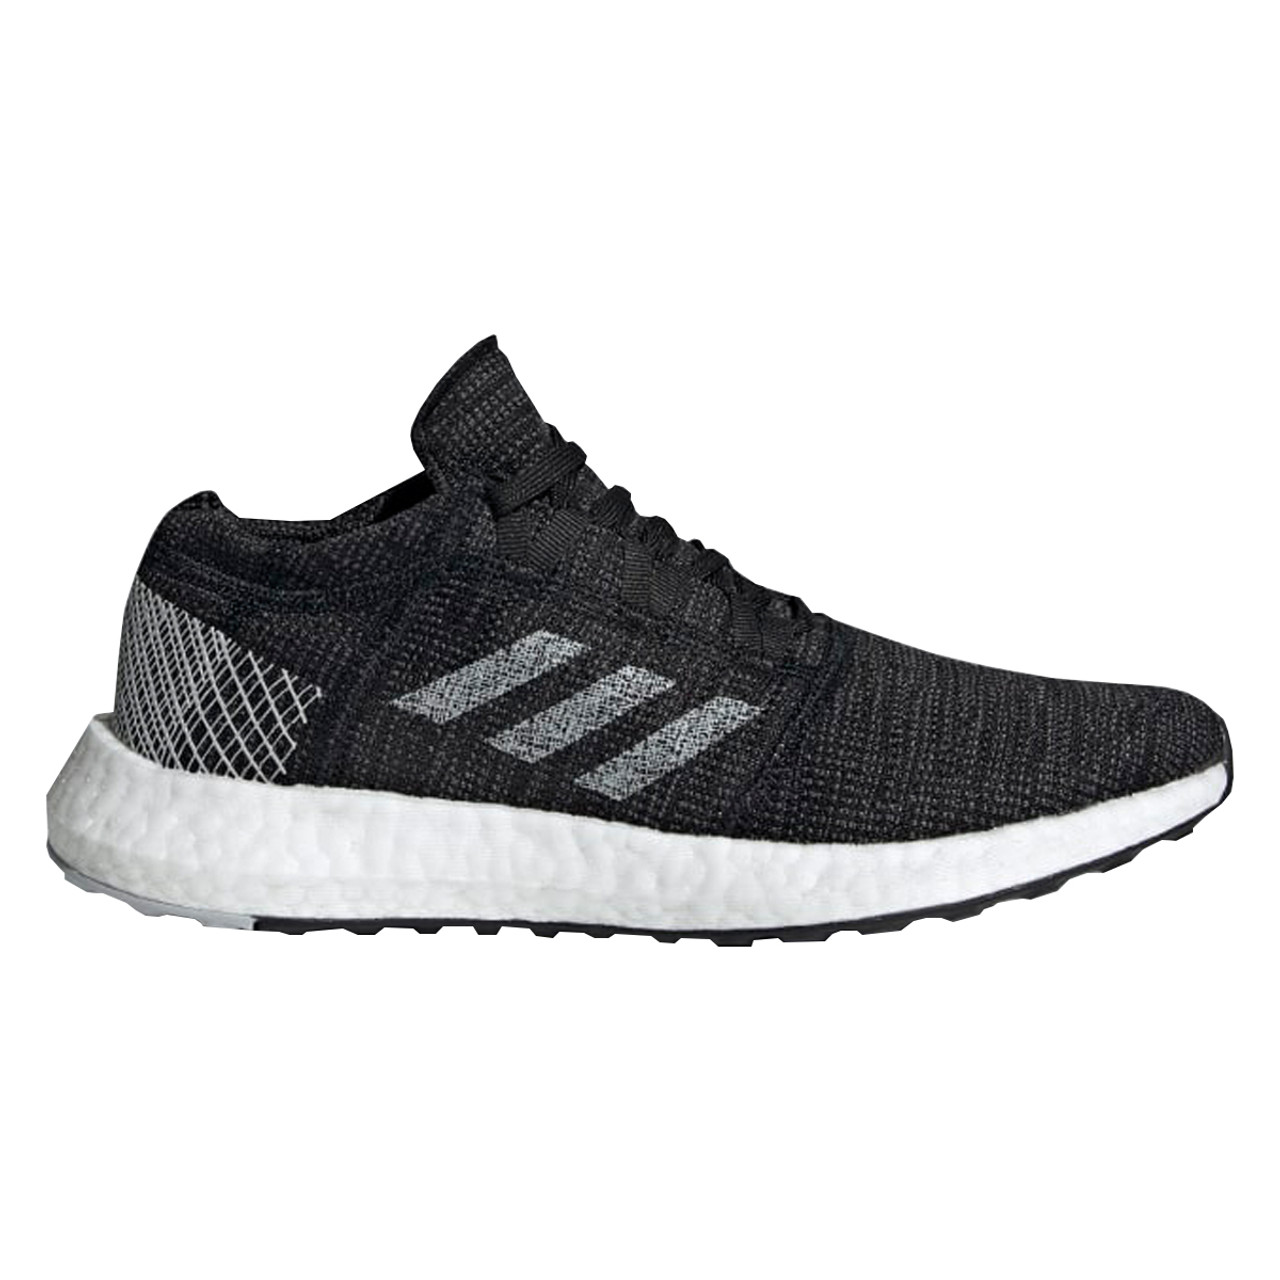 is pure boost good for running